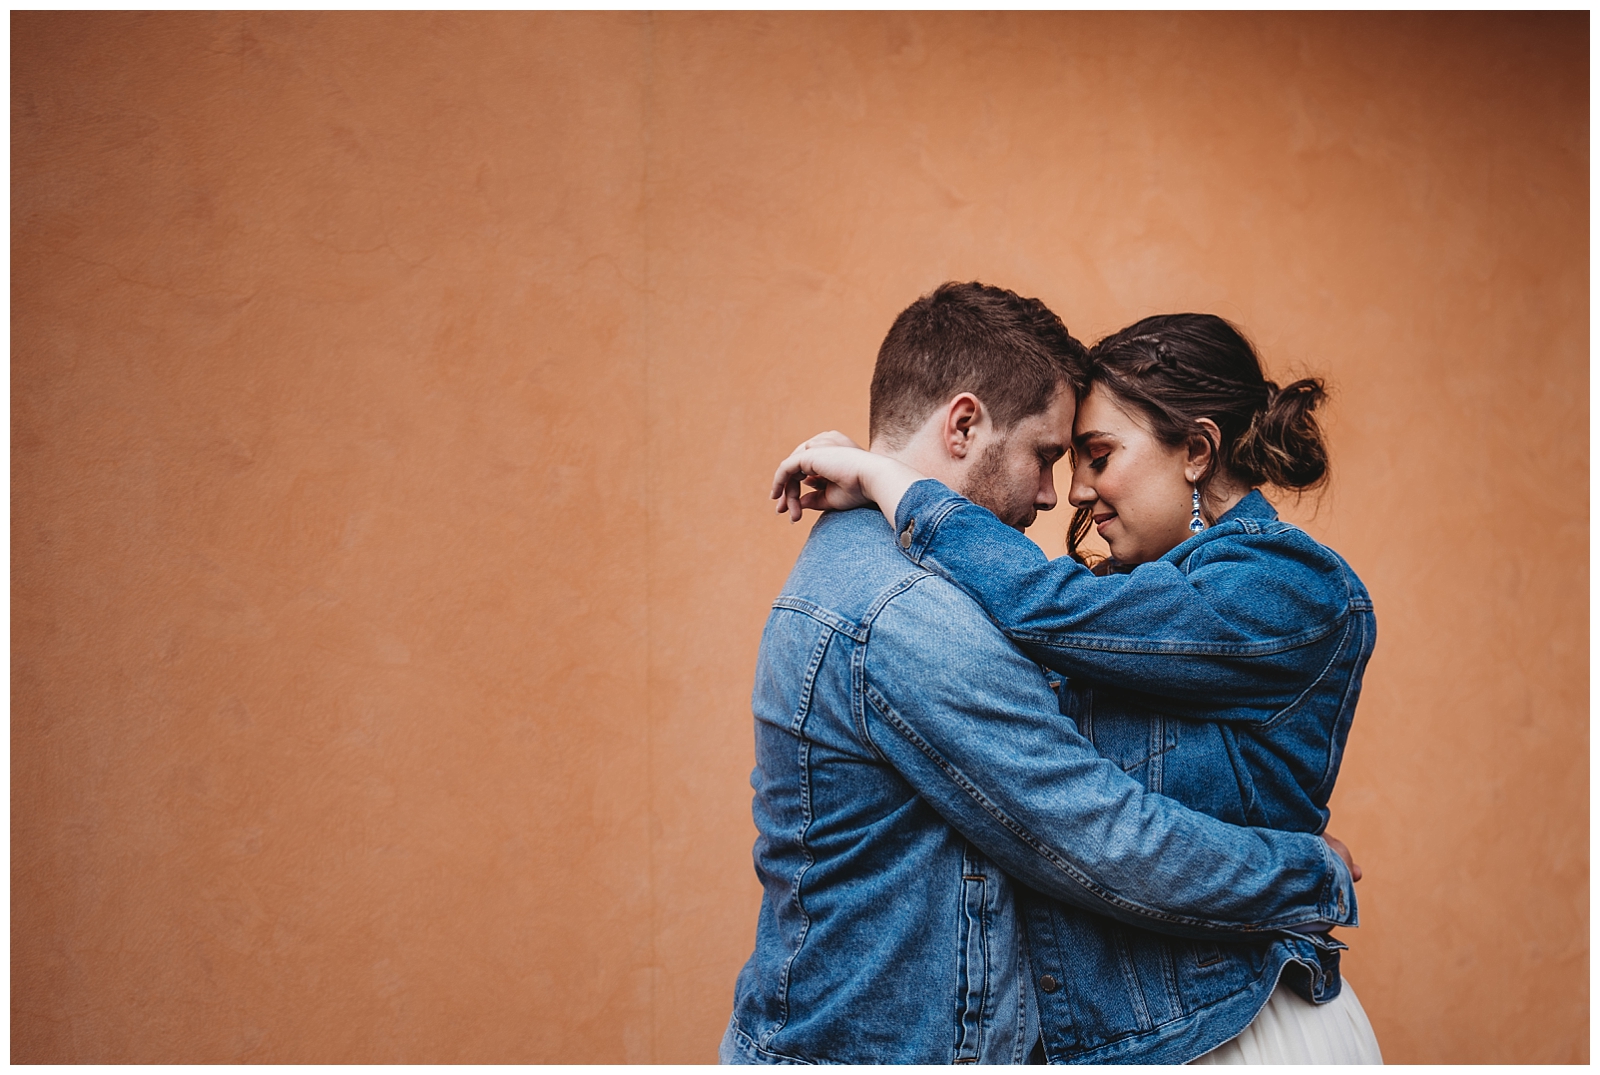 Bride and Groom in denim jackets stand facing each other with foreheads together in front of orange walll.